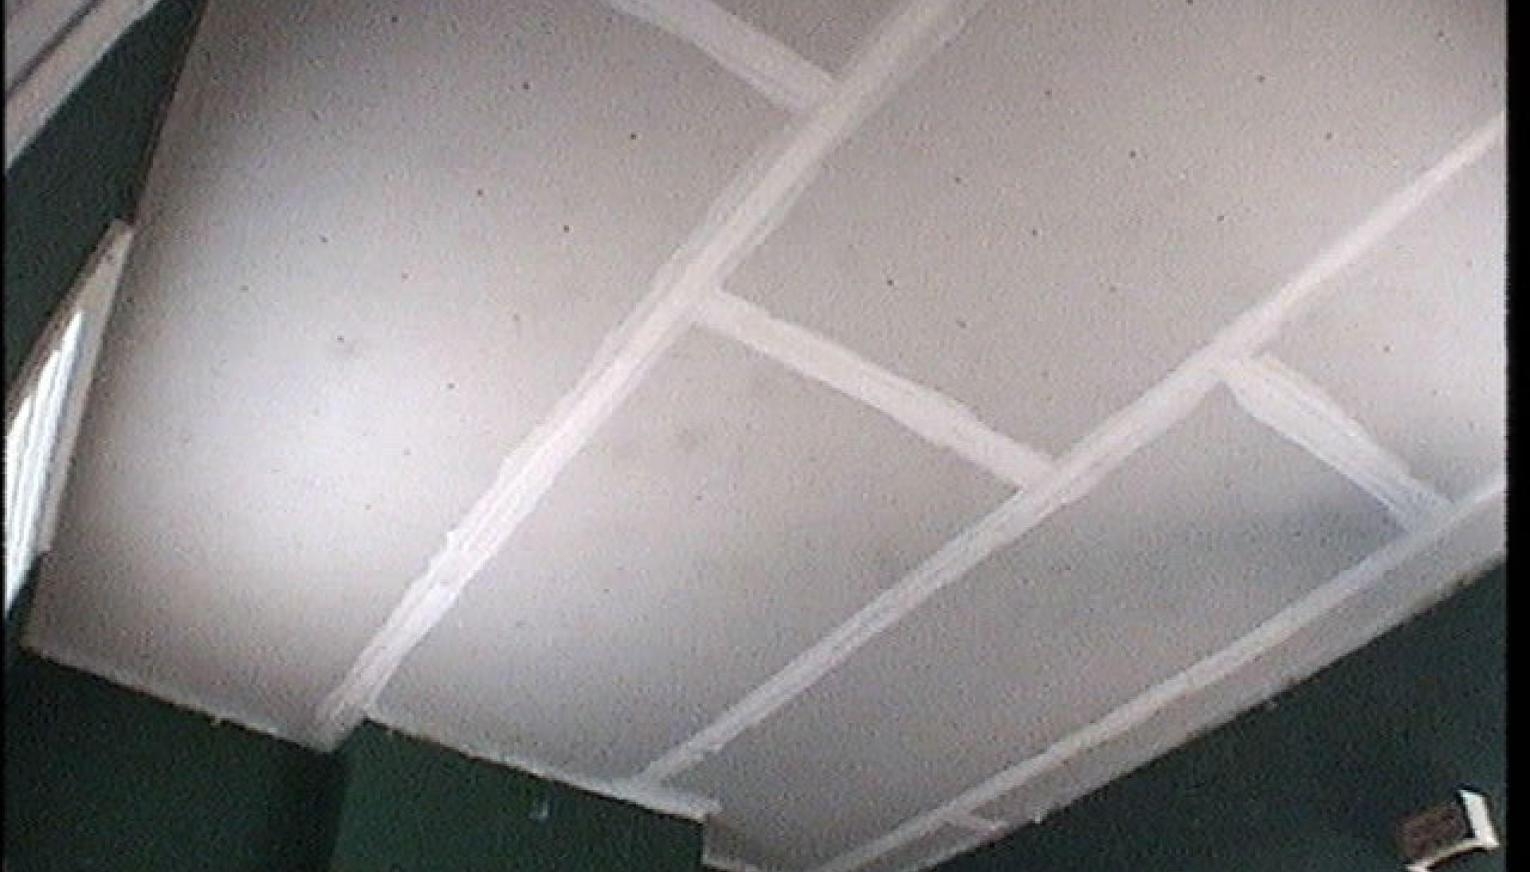 12x12 Staple Up Ceiling Tiles 12×12 Staple Up Ceiling Tiles ceiling drop ceiling makeover beautiful staple up ceiling tiles 1530 X 872